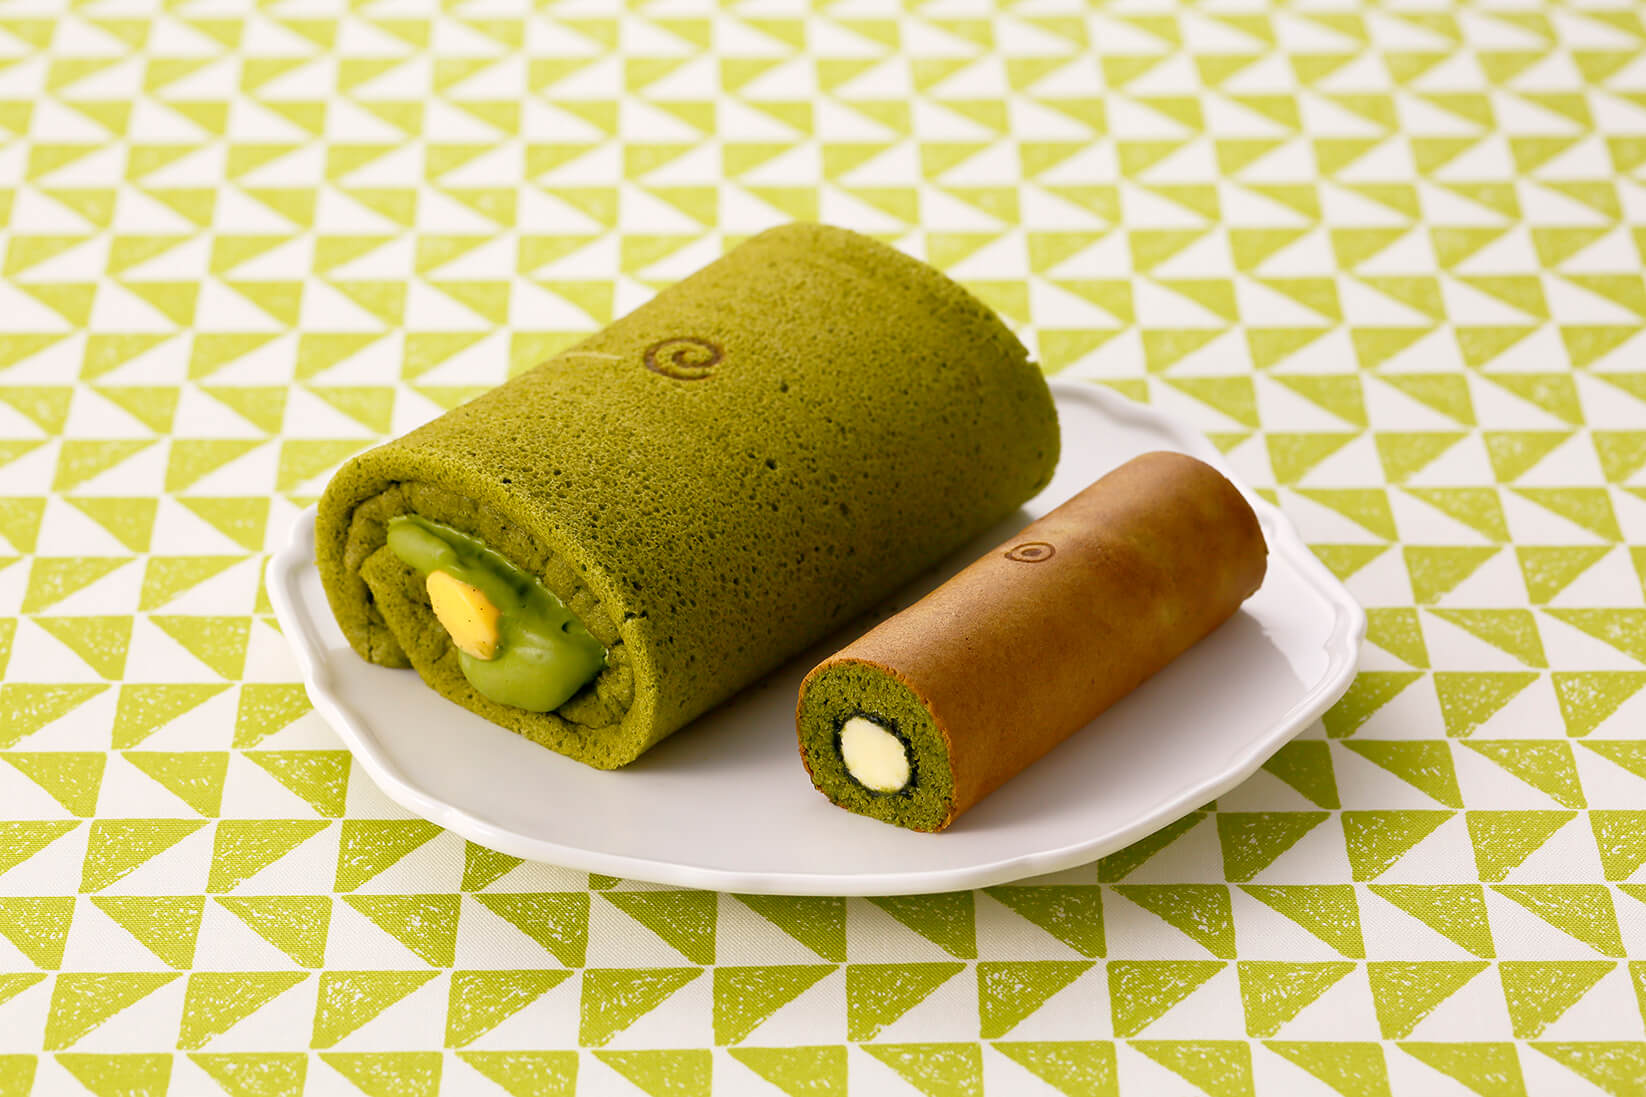 Malebranche Kyoto Kitayama Release Two Rich Tea Roll Cakes Perfect as Gifts